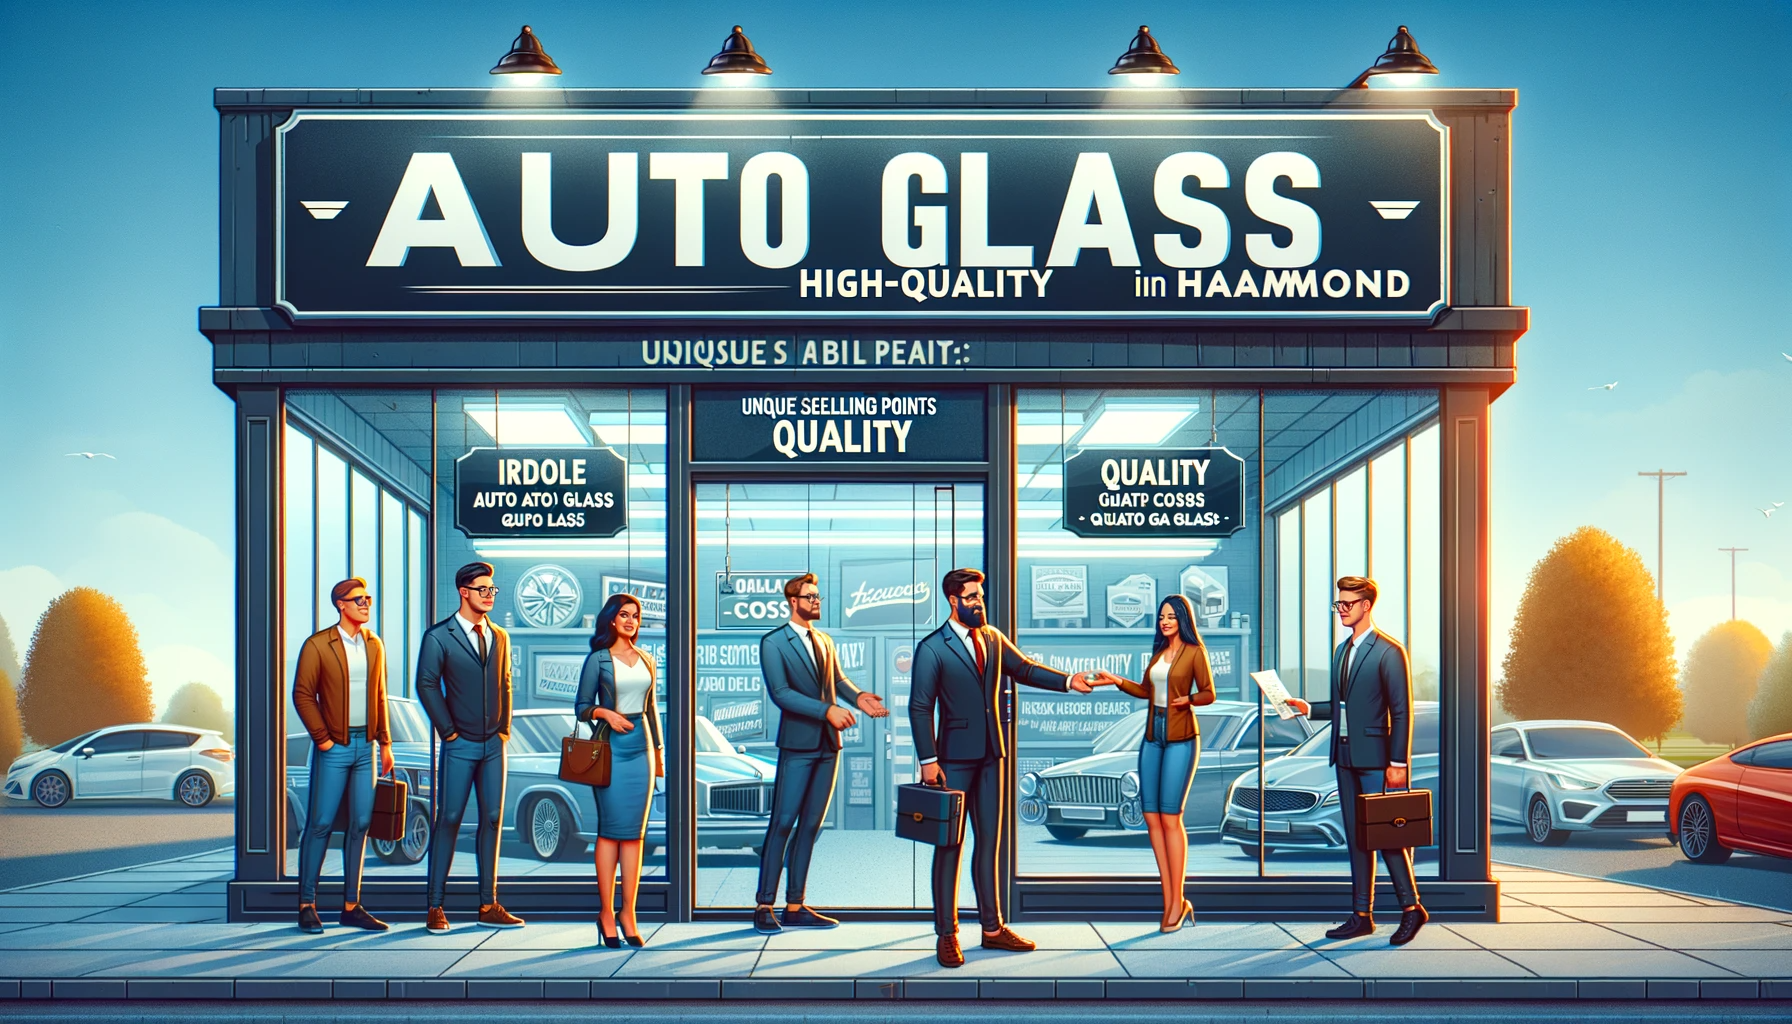 The storefront of 'Low-Cost, High-Quality Auto Glass in Hammond' features a sleek design with signs about affordability and quality. A window shows the busy workshop inside. Outside, a Hispanic woman and a Middle-Eastern man, among other customers, are contentedly leaving, receiving a flyer from a Caucasian male employee.